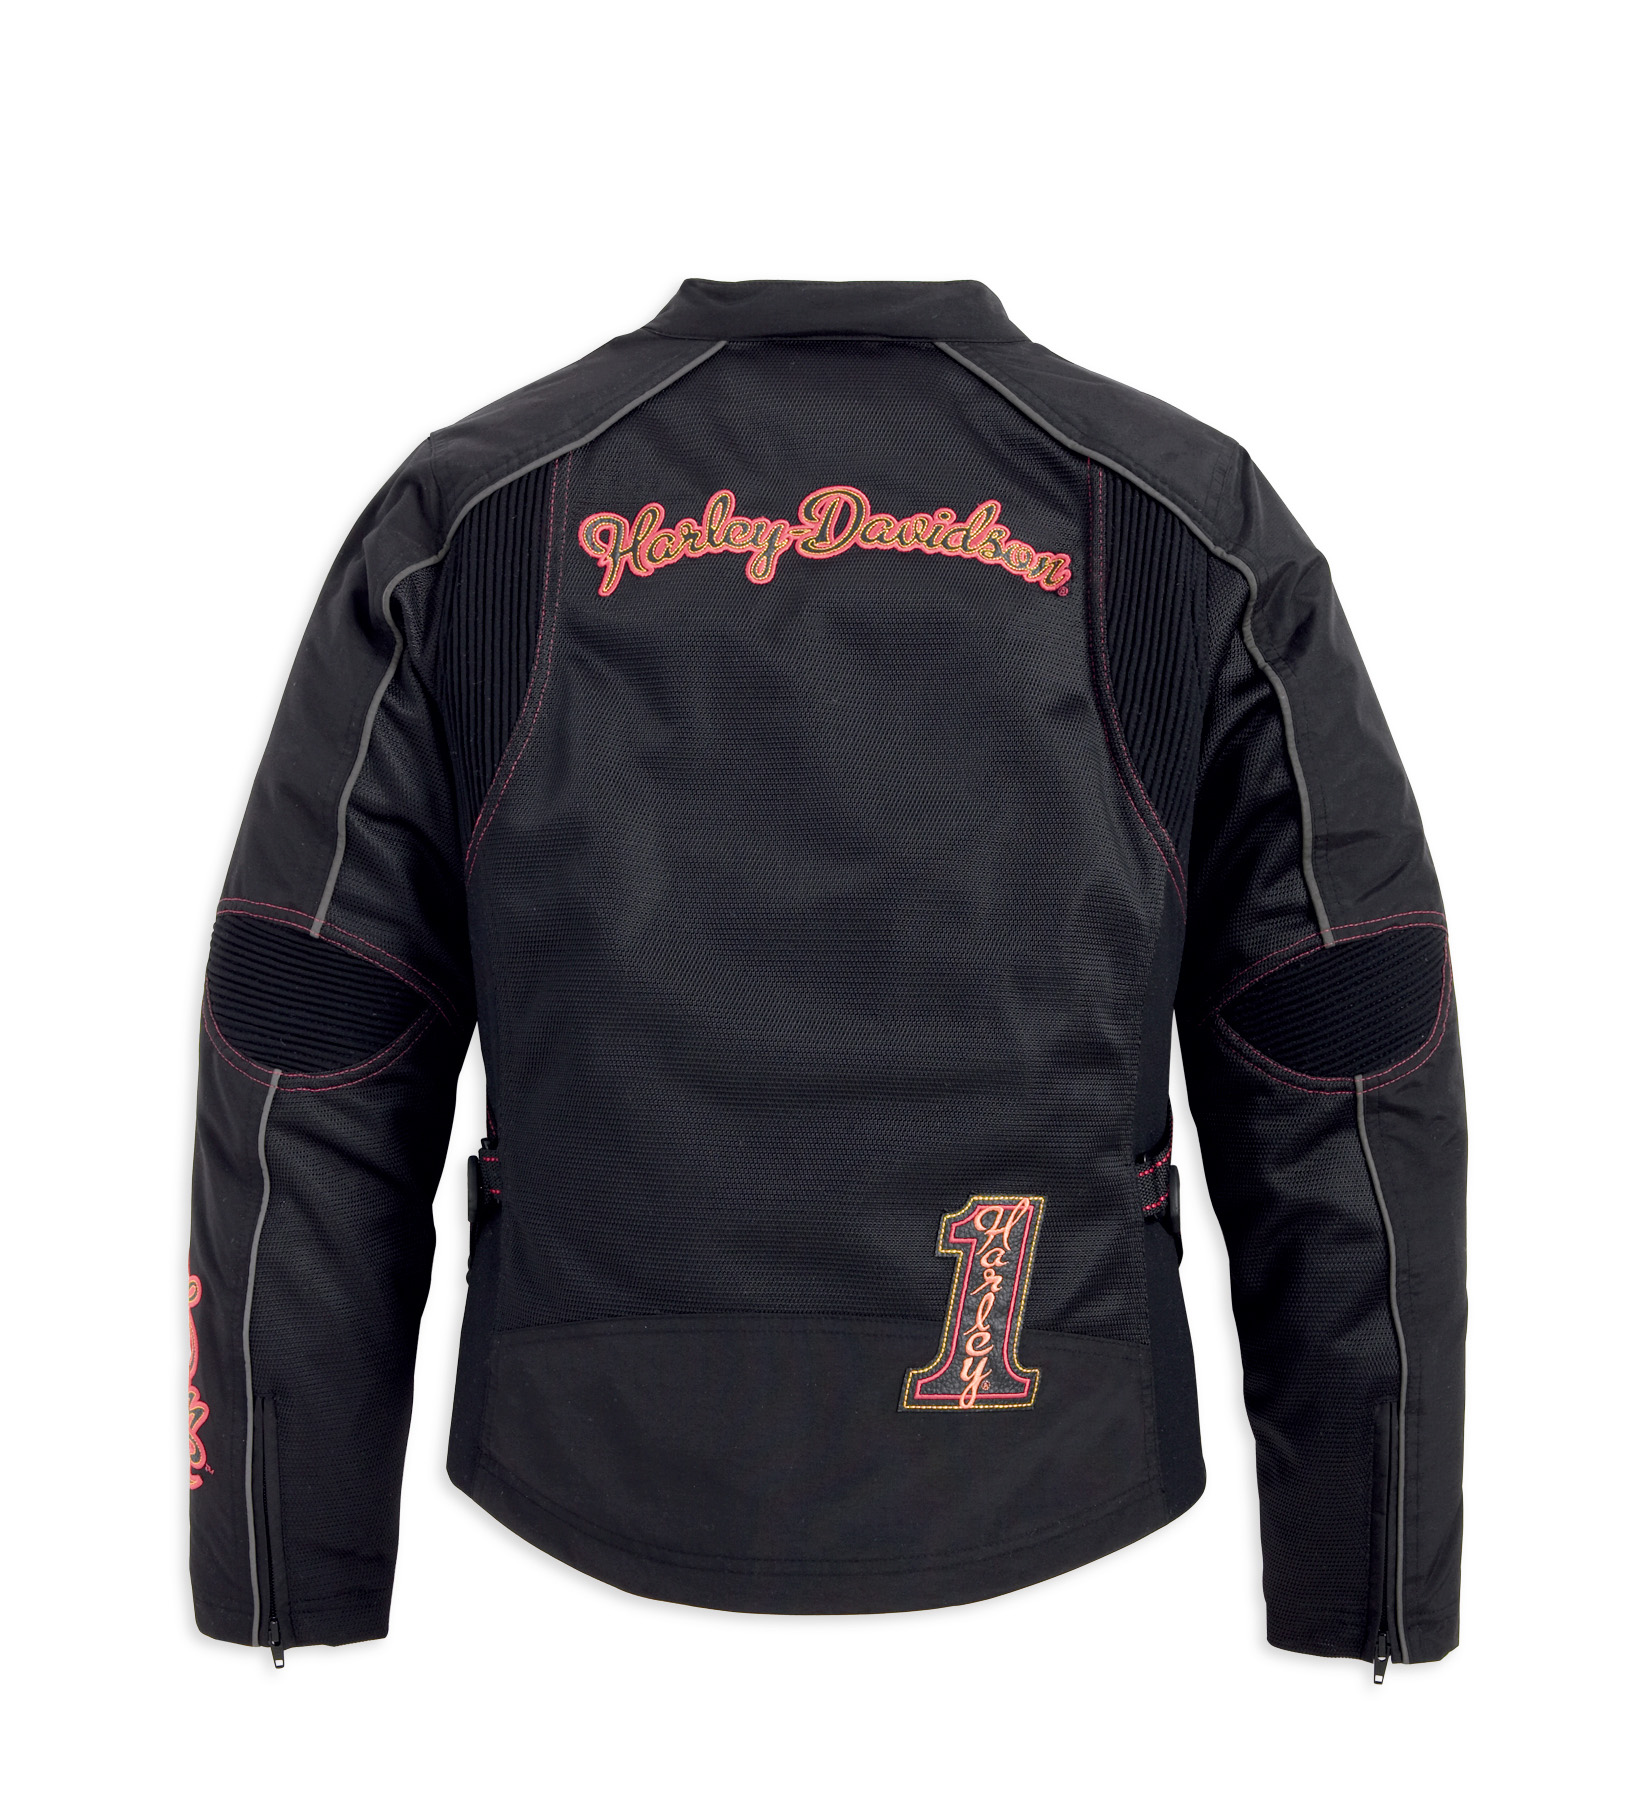 NEW WOMEN’S LEXI MESH & TEXTILE FUNCTIONAL JACKET FROM HARLEY-DAVIDSON ...